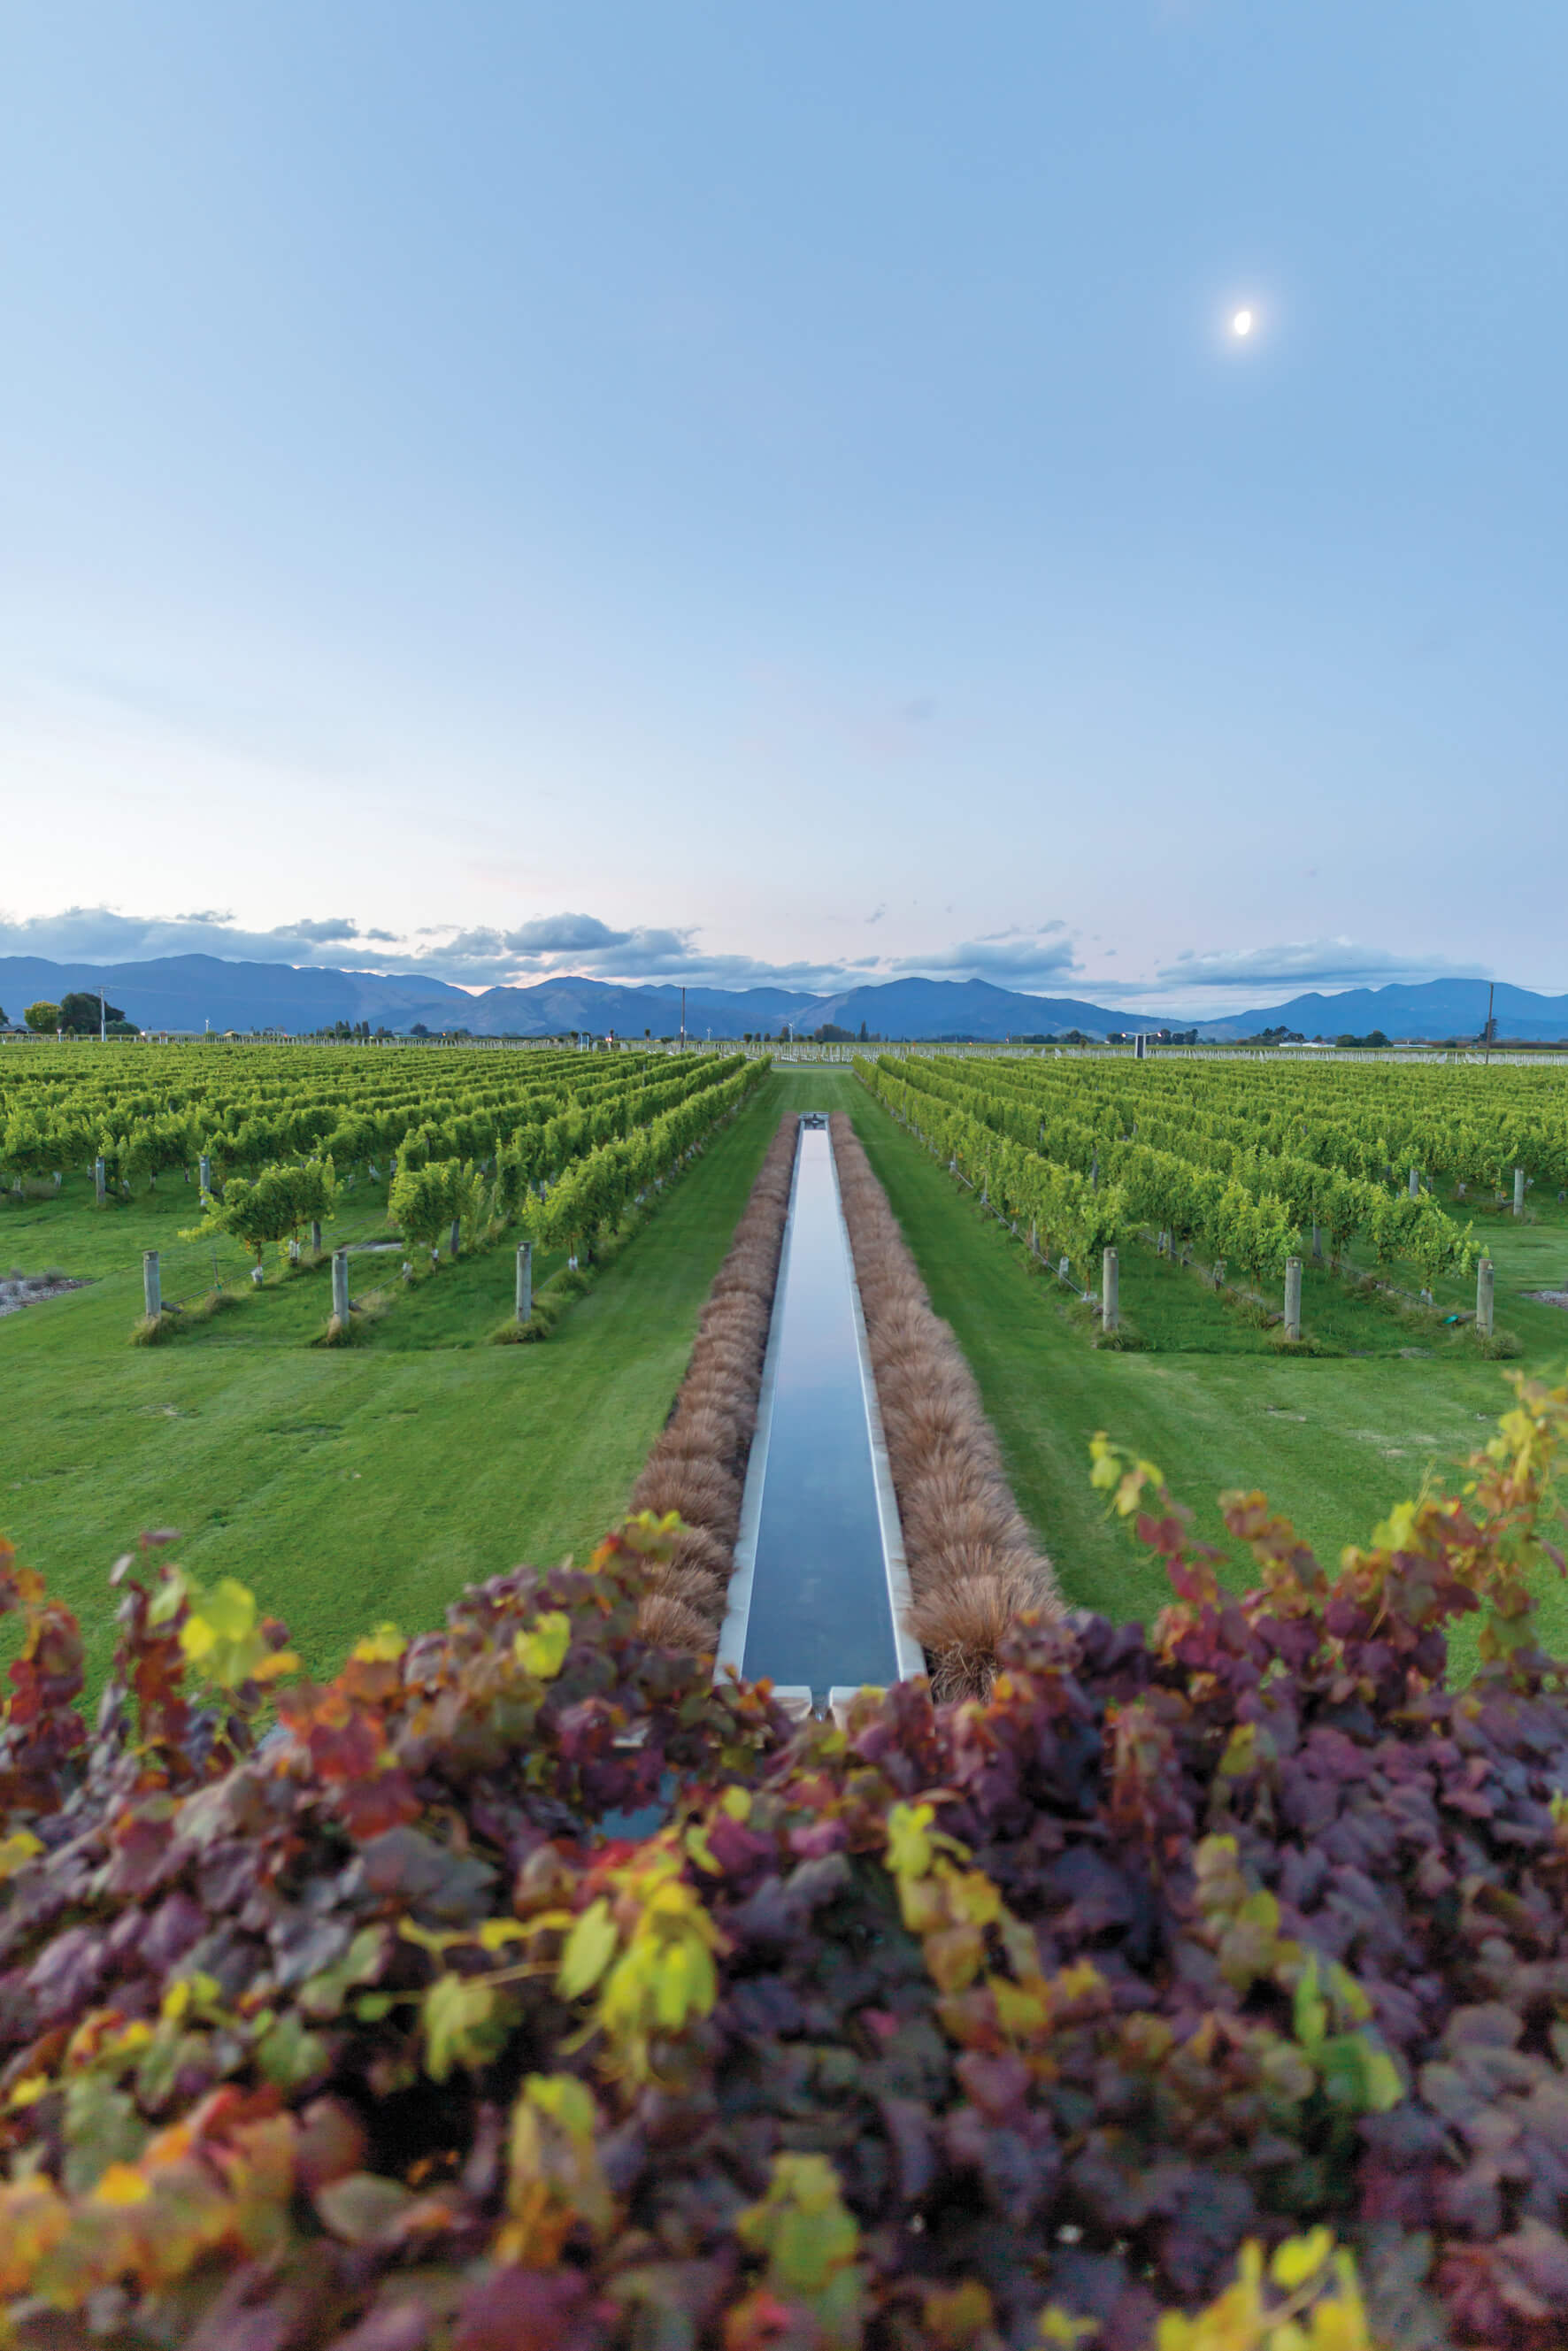 A water way runs directly out into the vineyards from the Marlborough Winery, with mountains in the distance